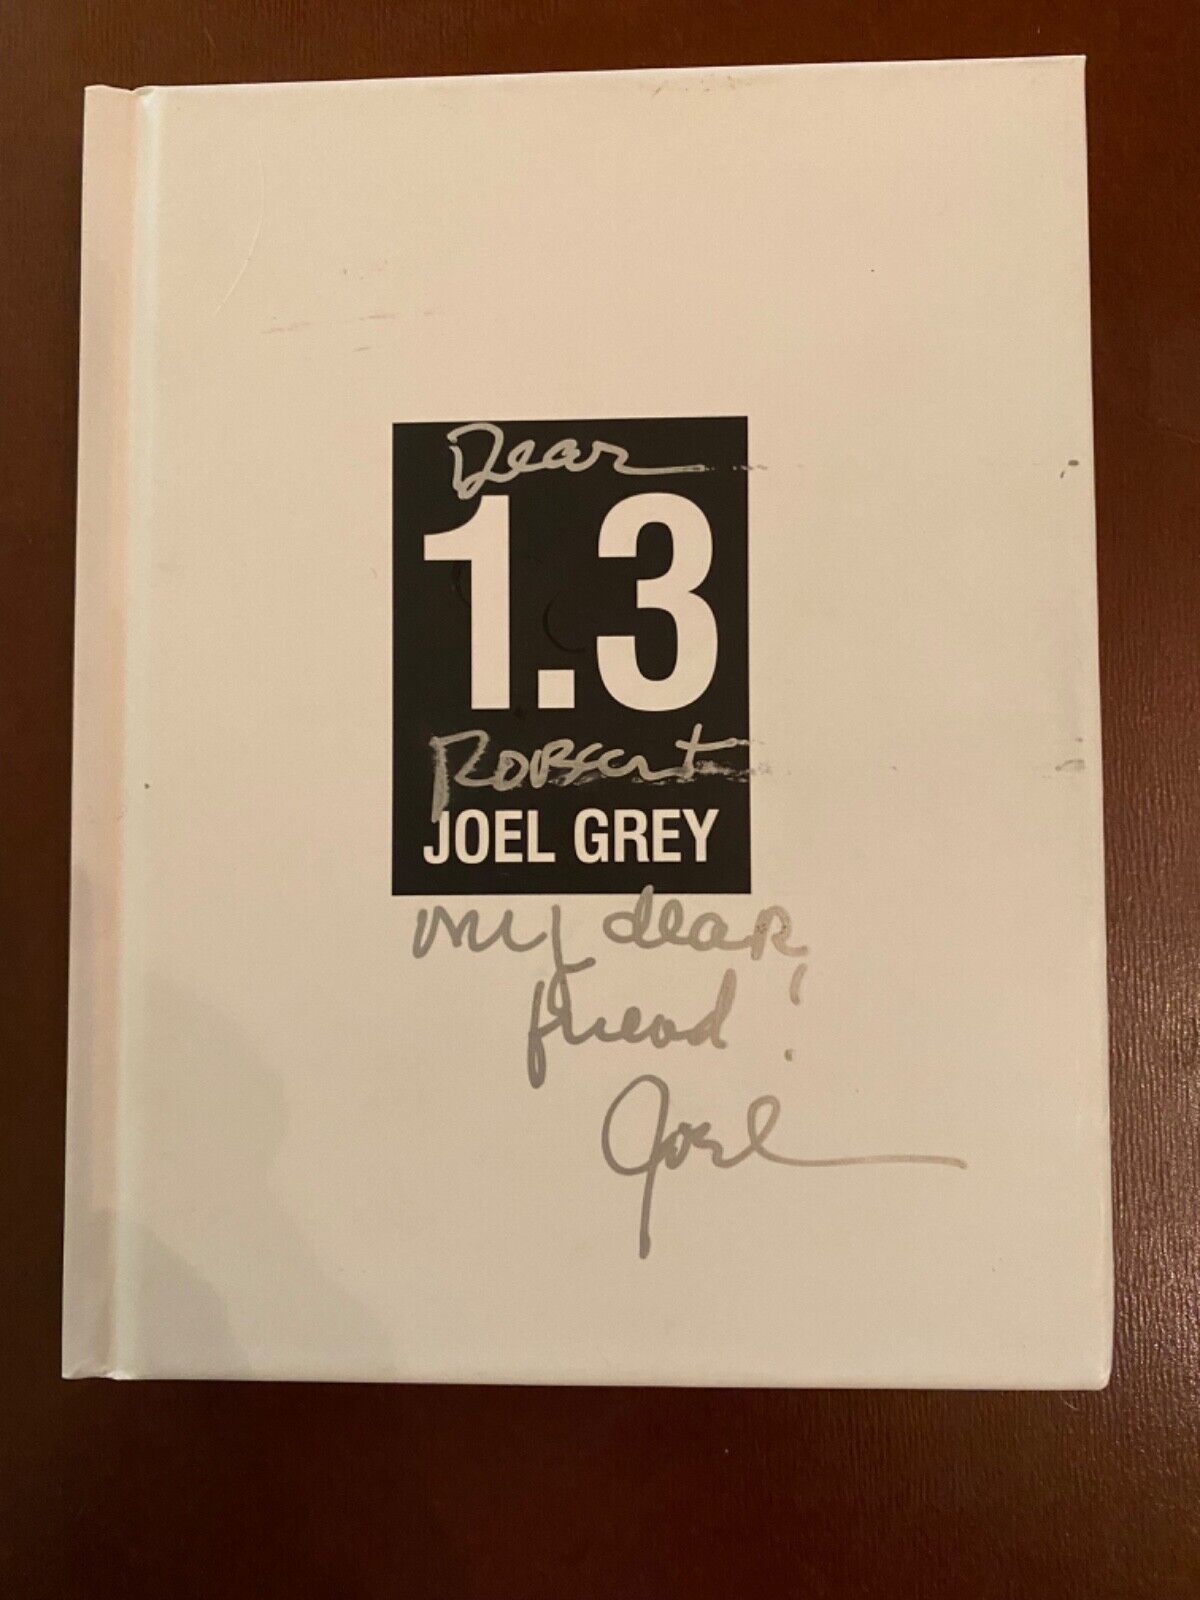 Autographed Book 1.3  by Joel Grey